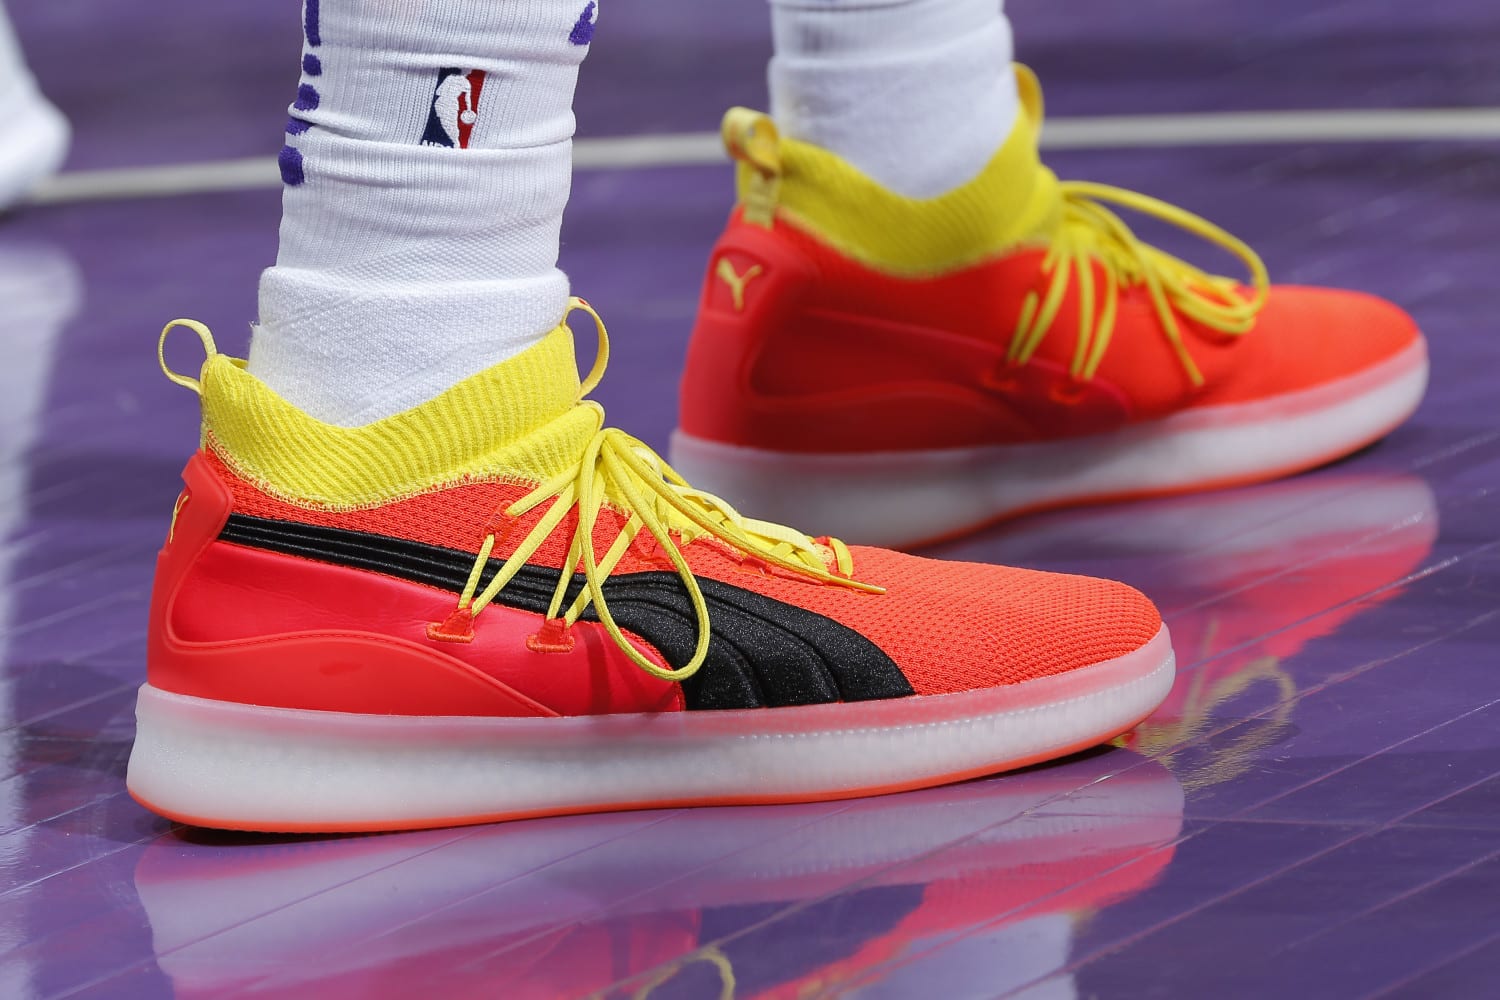 toast shorten gesture Which NBA player had the best sneakers in 2018 Summer League?